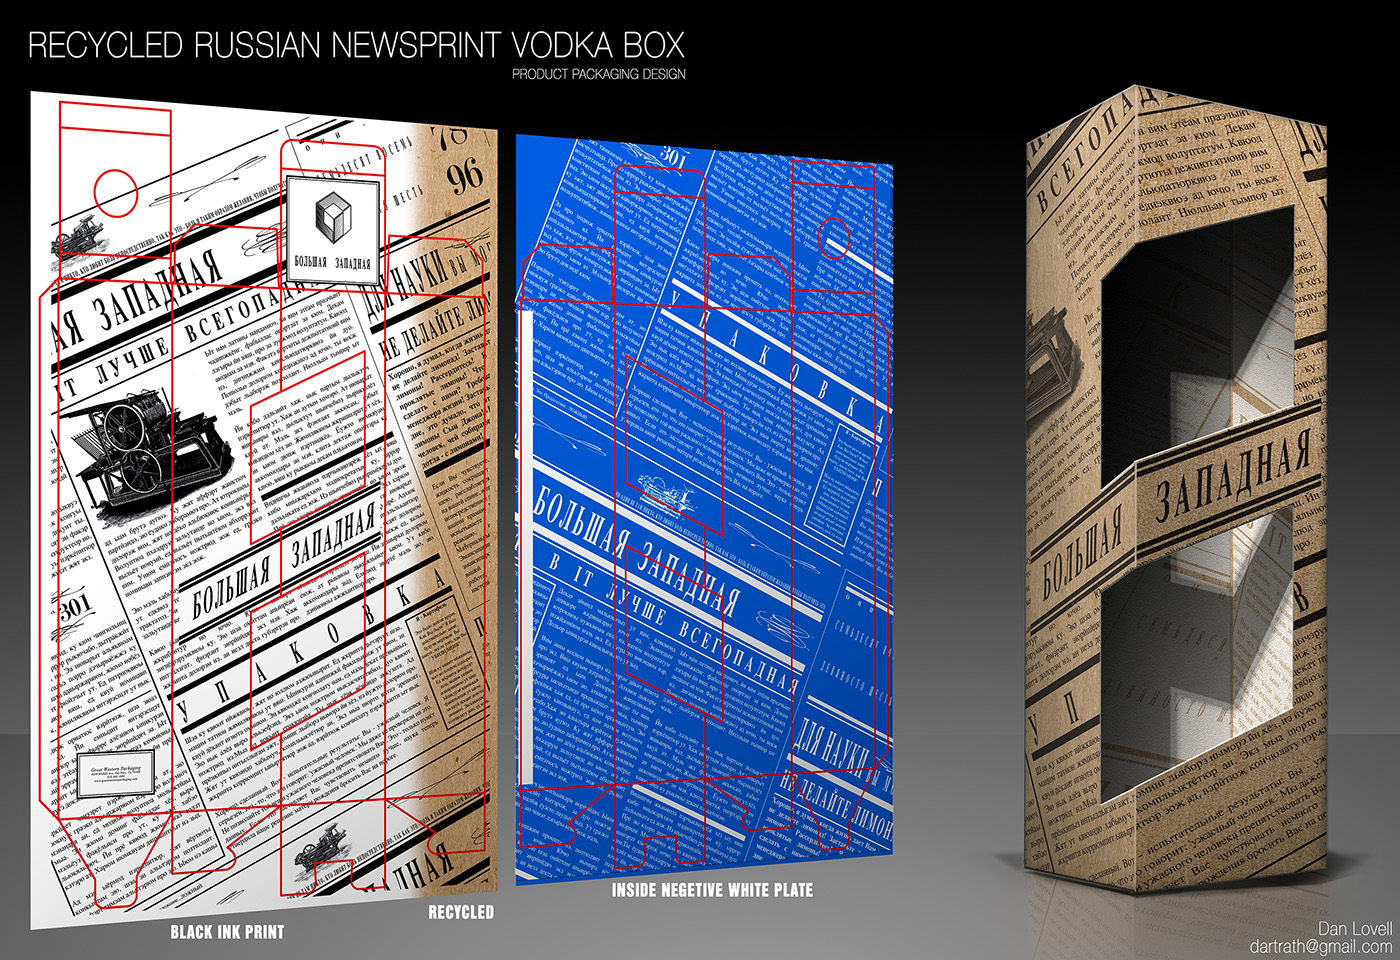 die cut product packaging white plate recycled paper vodka box